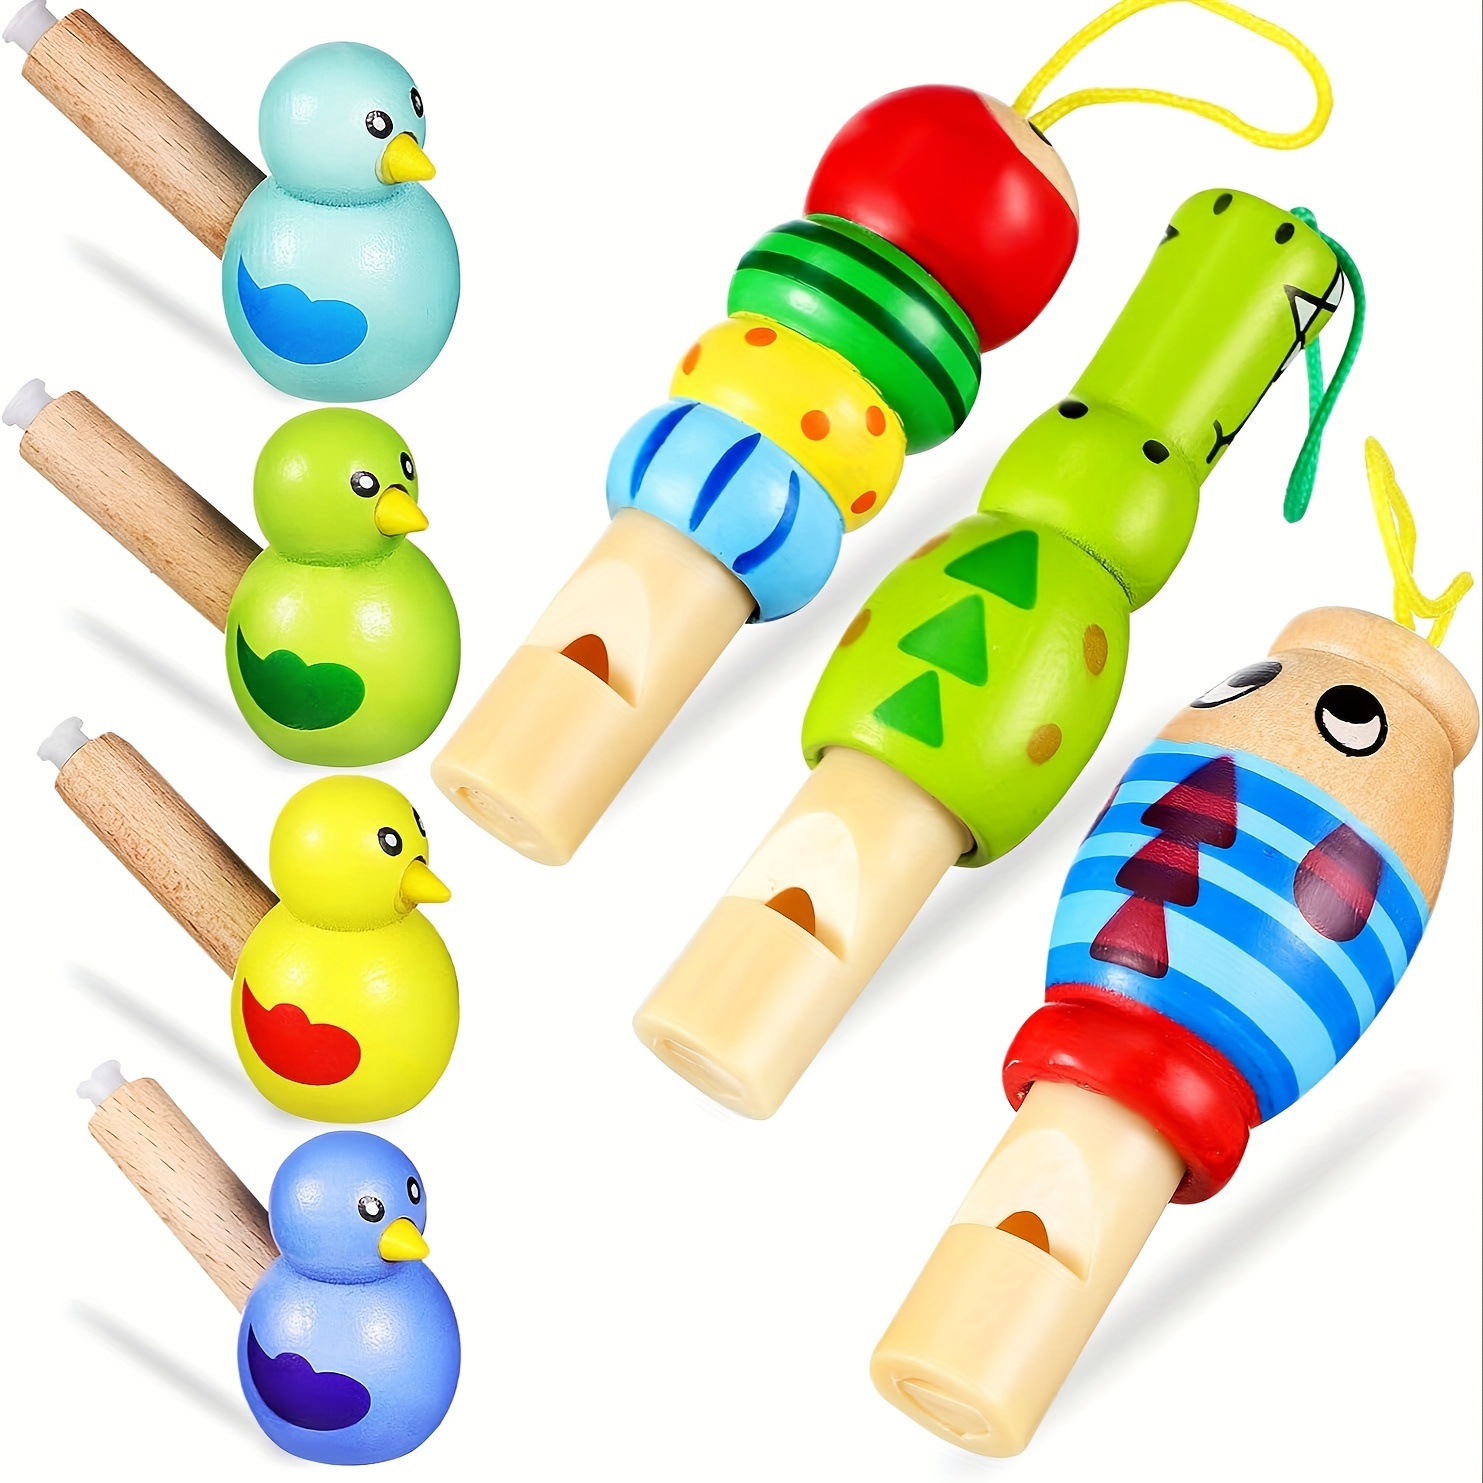 

7pcs Wooden Whistle, Cute Cartoon Animal Bird Whistle Set, Musical Instrument Toys, Sounding Toys Learning Props, Party Favors Gifts